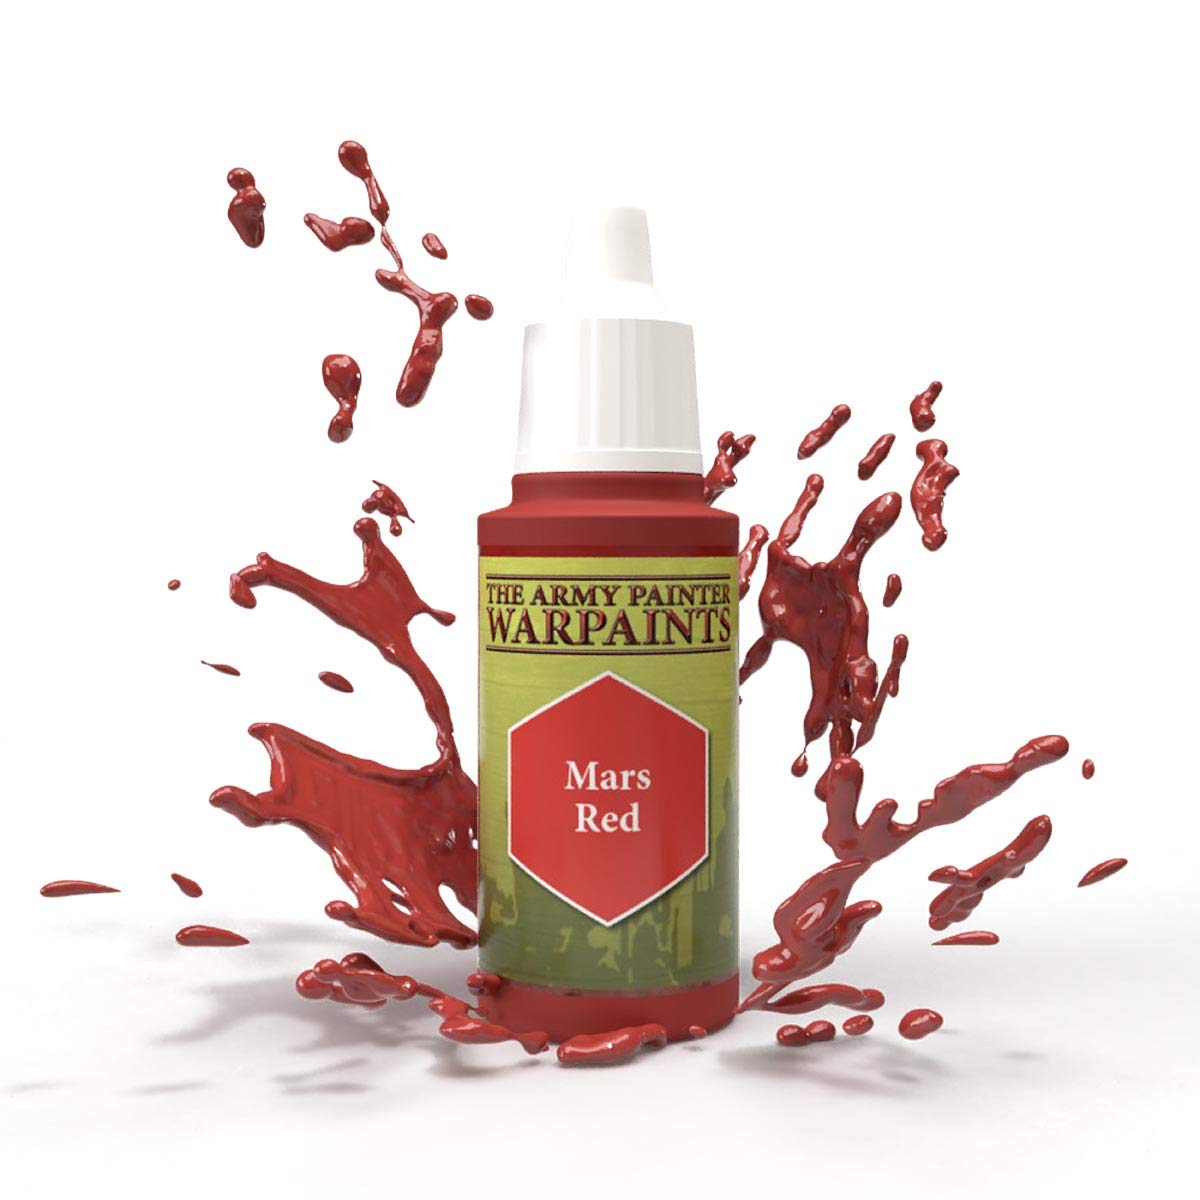 The Army Painter Mars Red Warpaint - Acrylic Non-Toxic Heavily Pigmented Water Based Paint for Tabletop Roleplaying, Boardgames,